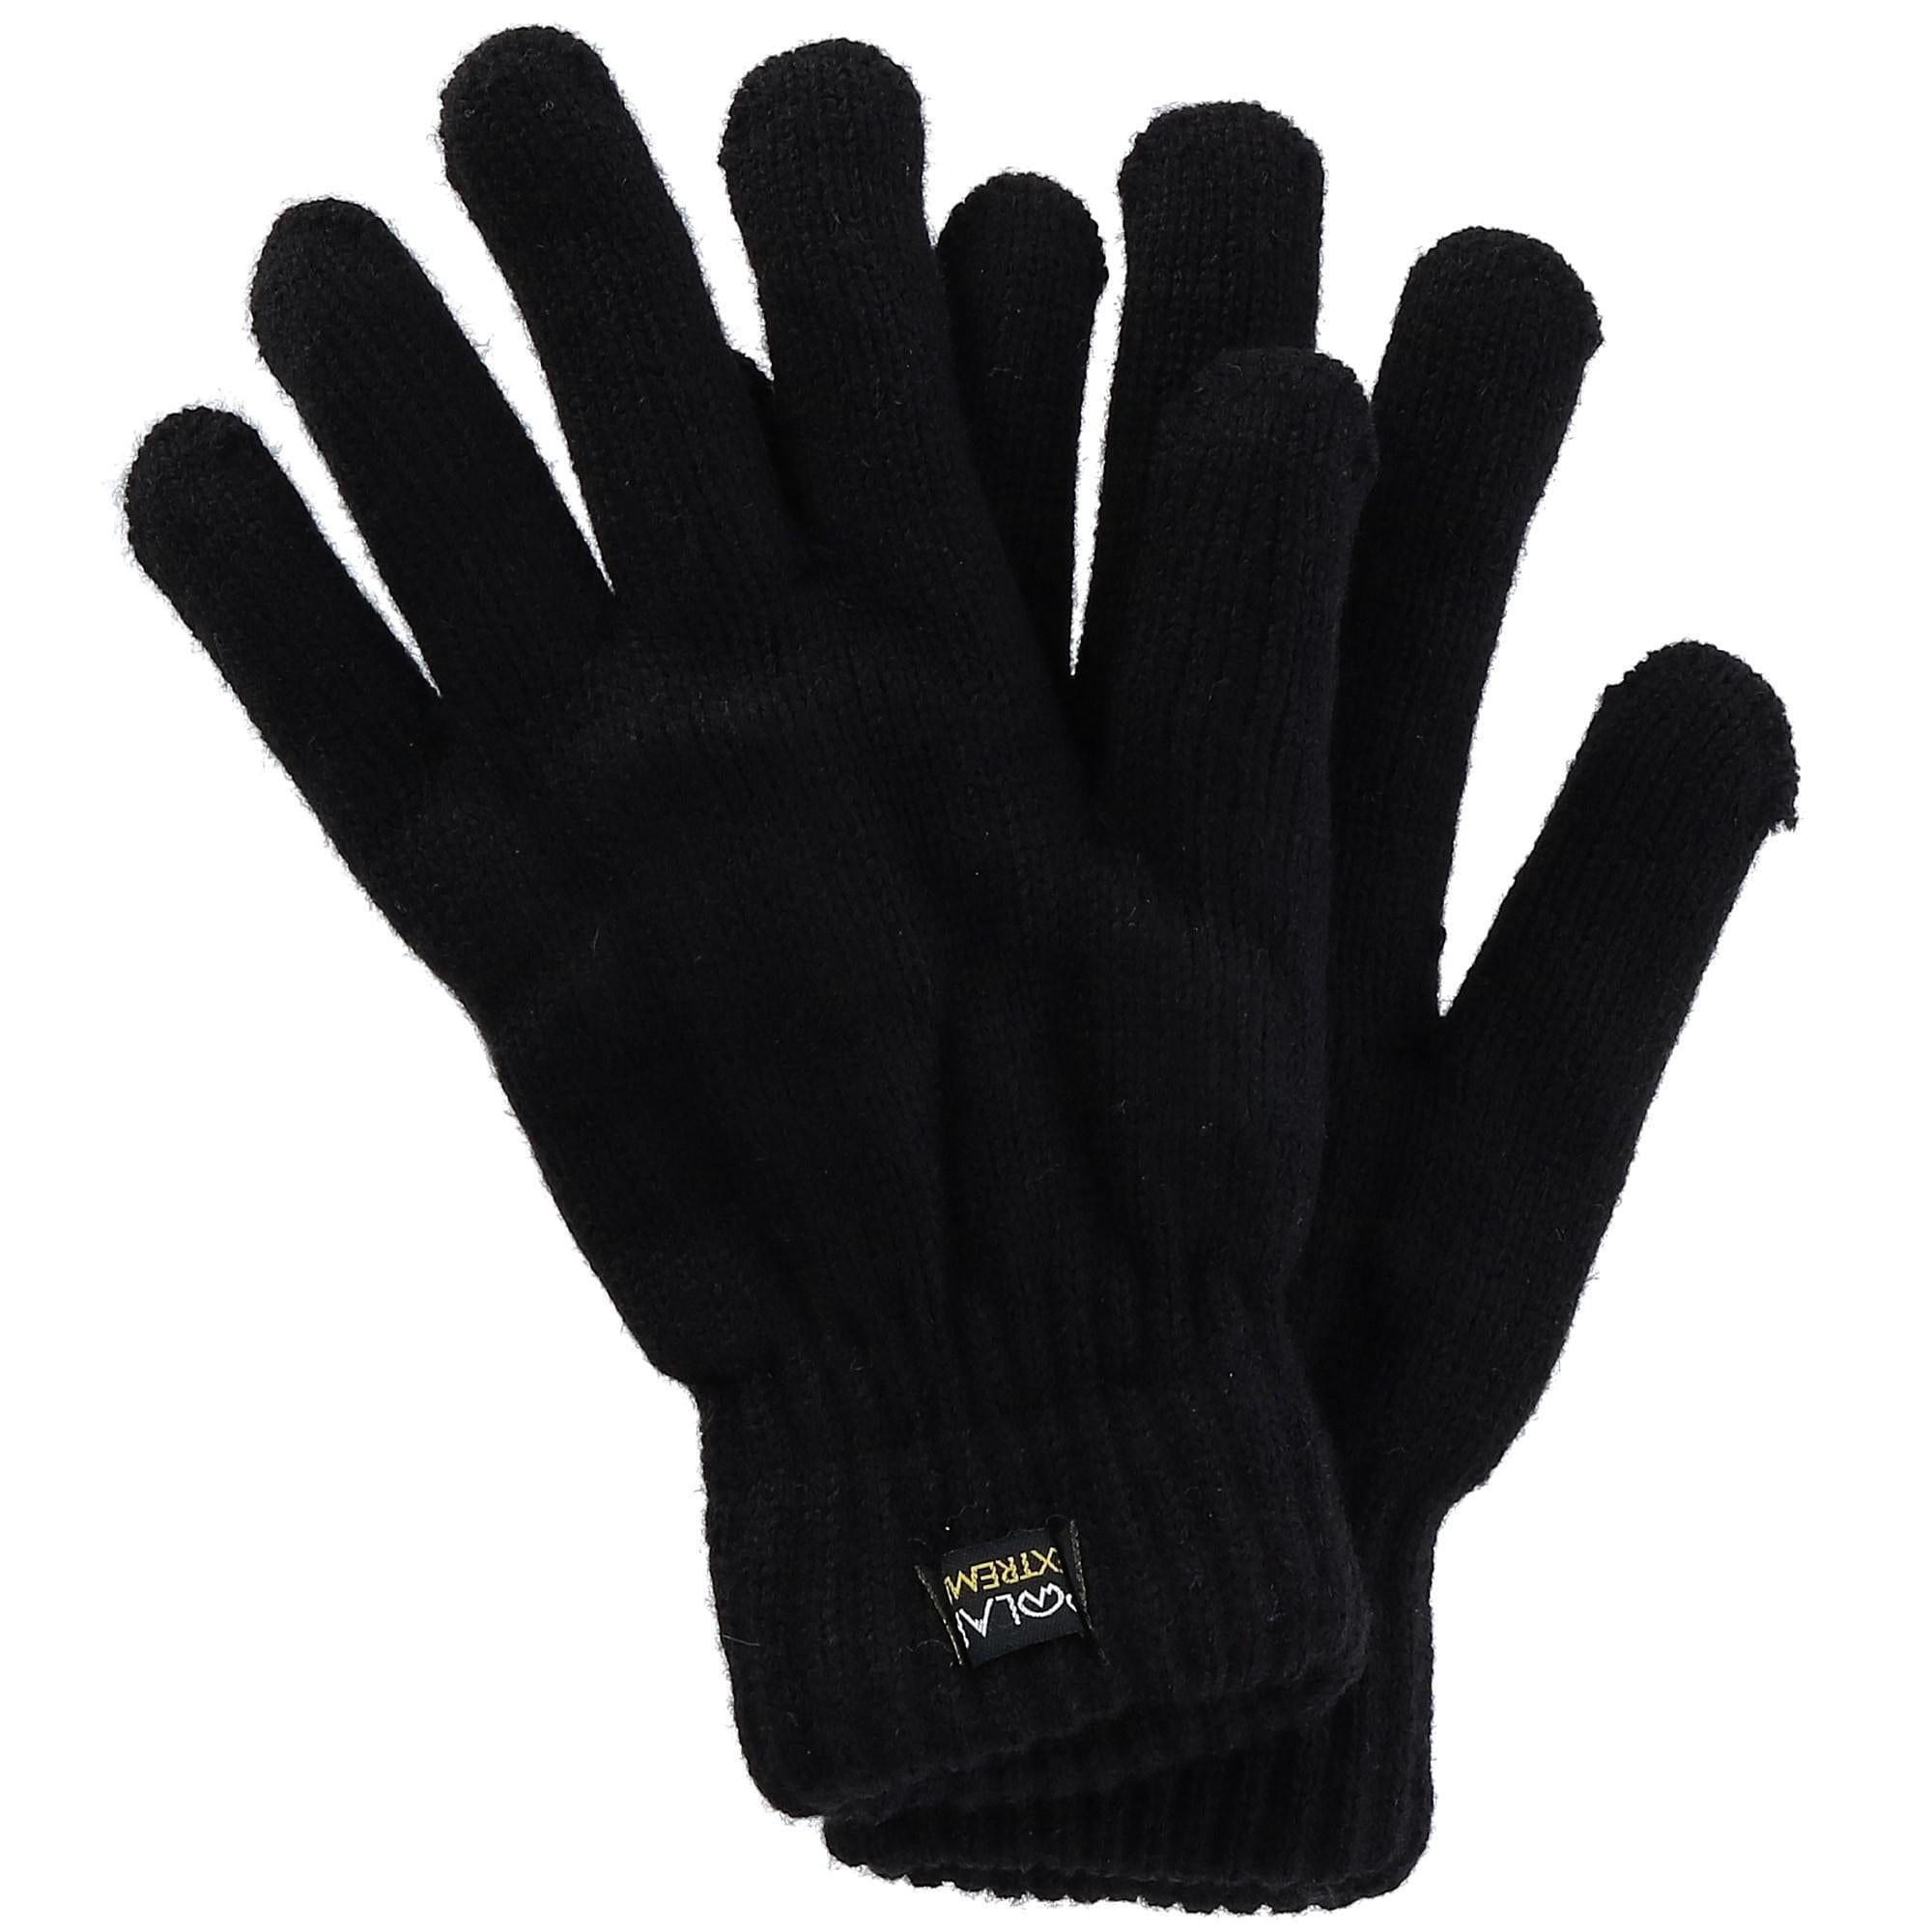 Men's Insulated Knit Thermal Gloves by Polar Extreme | Gloves at ...